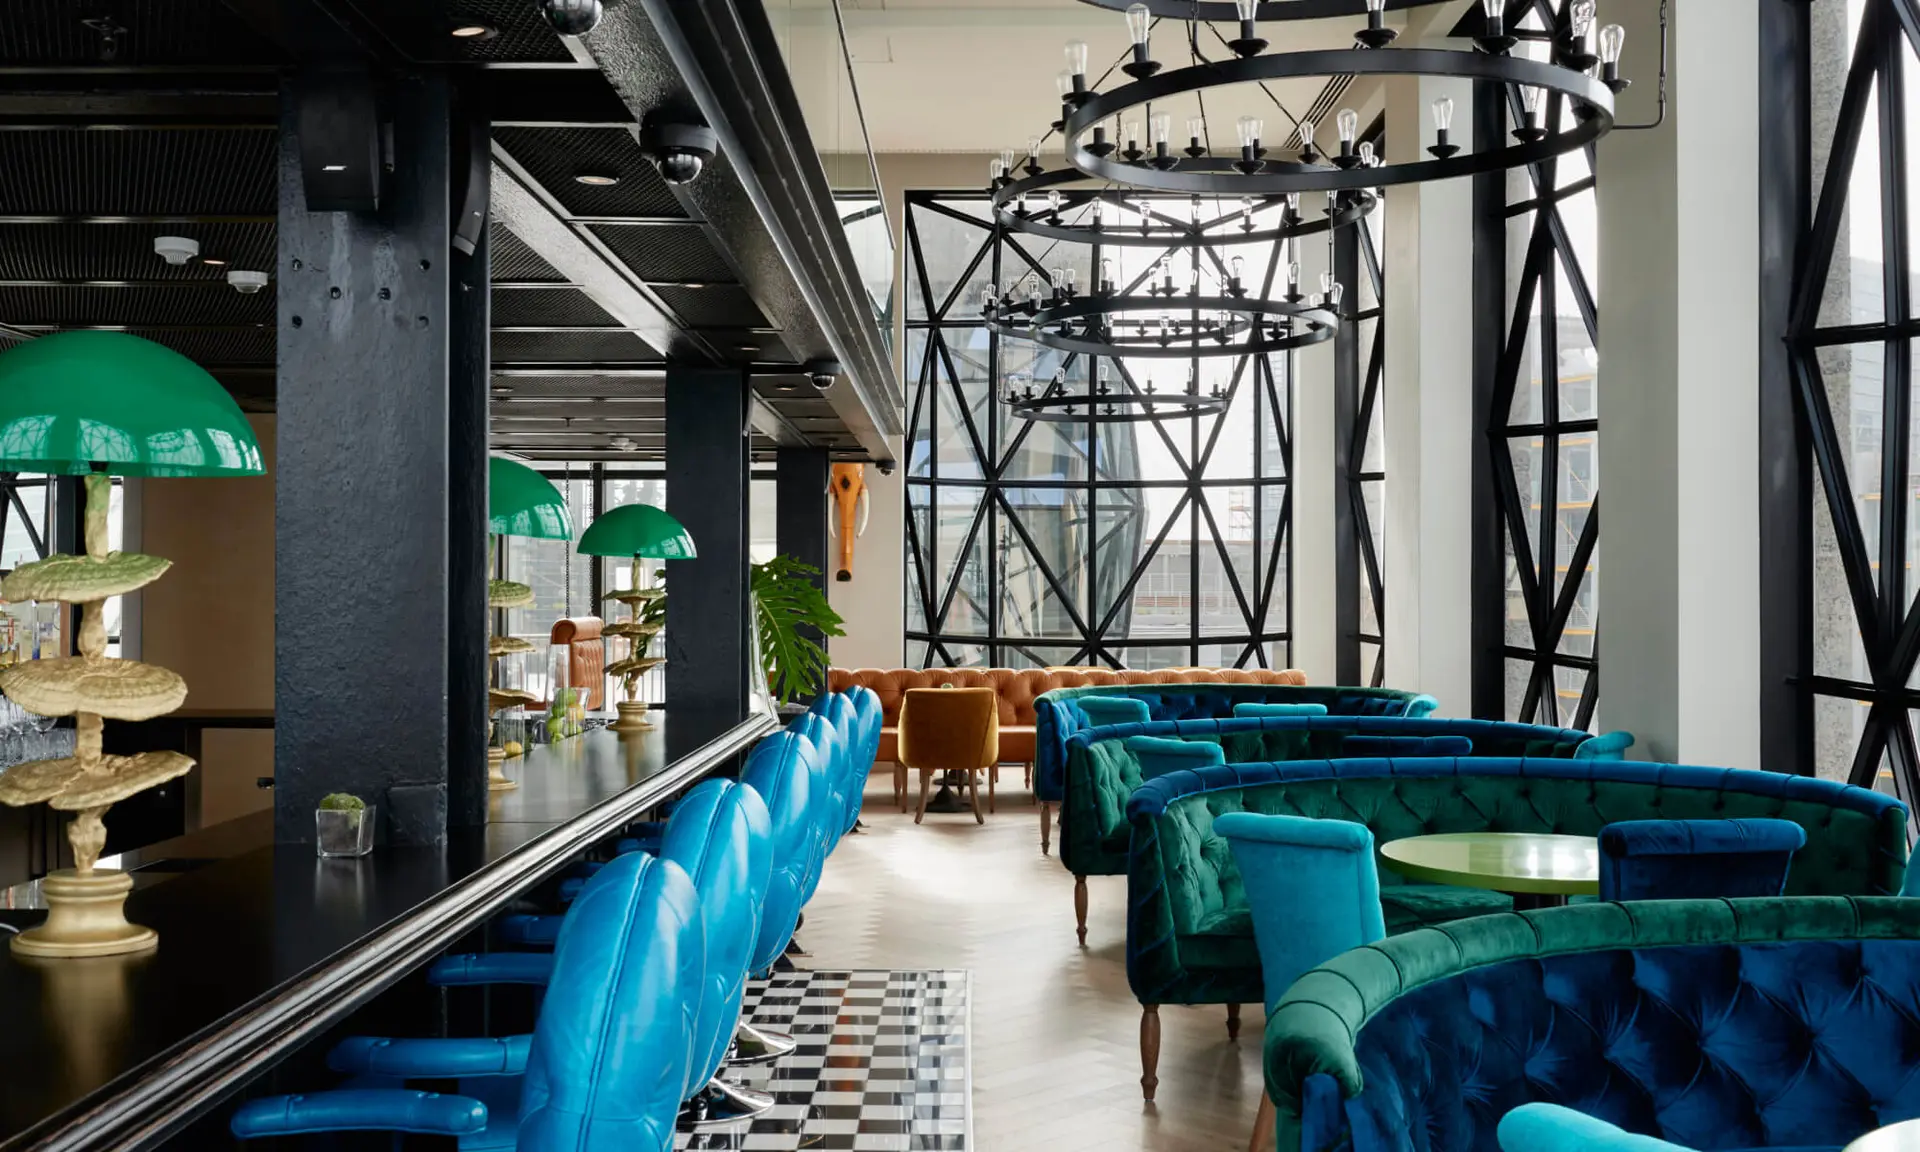 Hotel review Restaurants & Bars' - The Silo Hotel - 0